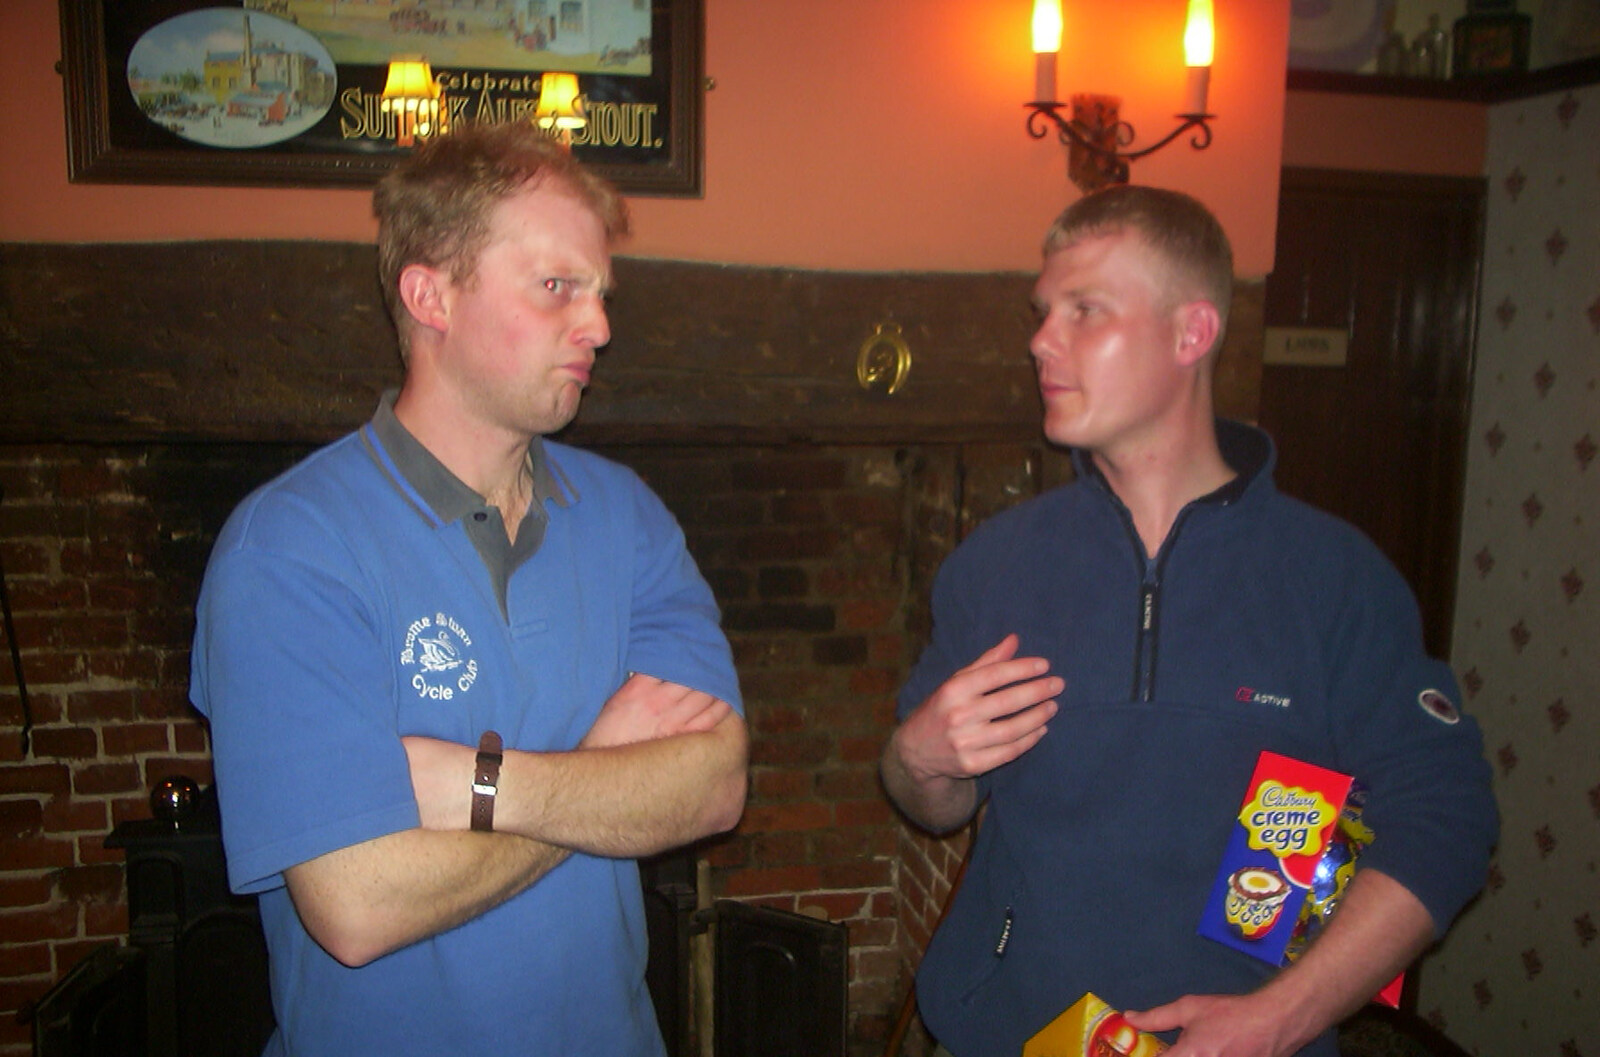 Wednesday and Thursday: The BSCC Season Opens, and Stuff Happens, Suffolk - 9th April 2004: An unsure Paul, with Mikey P